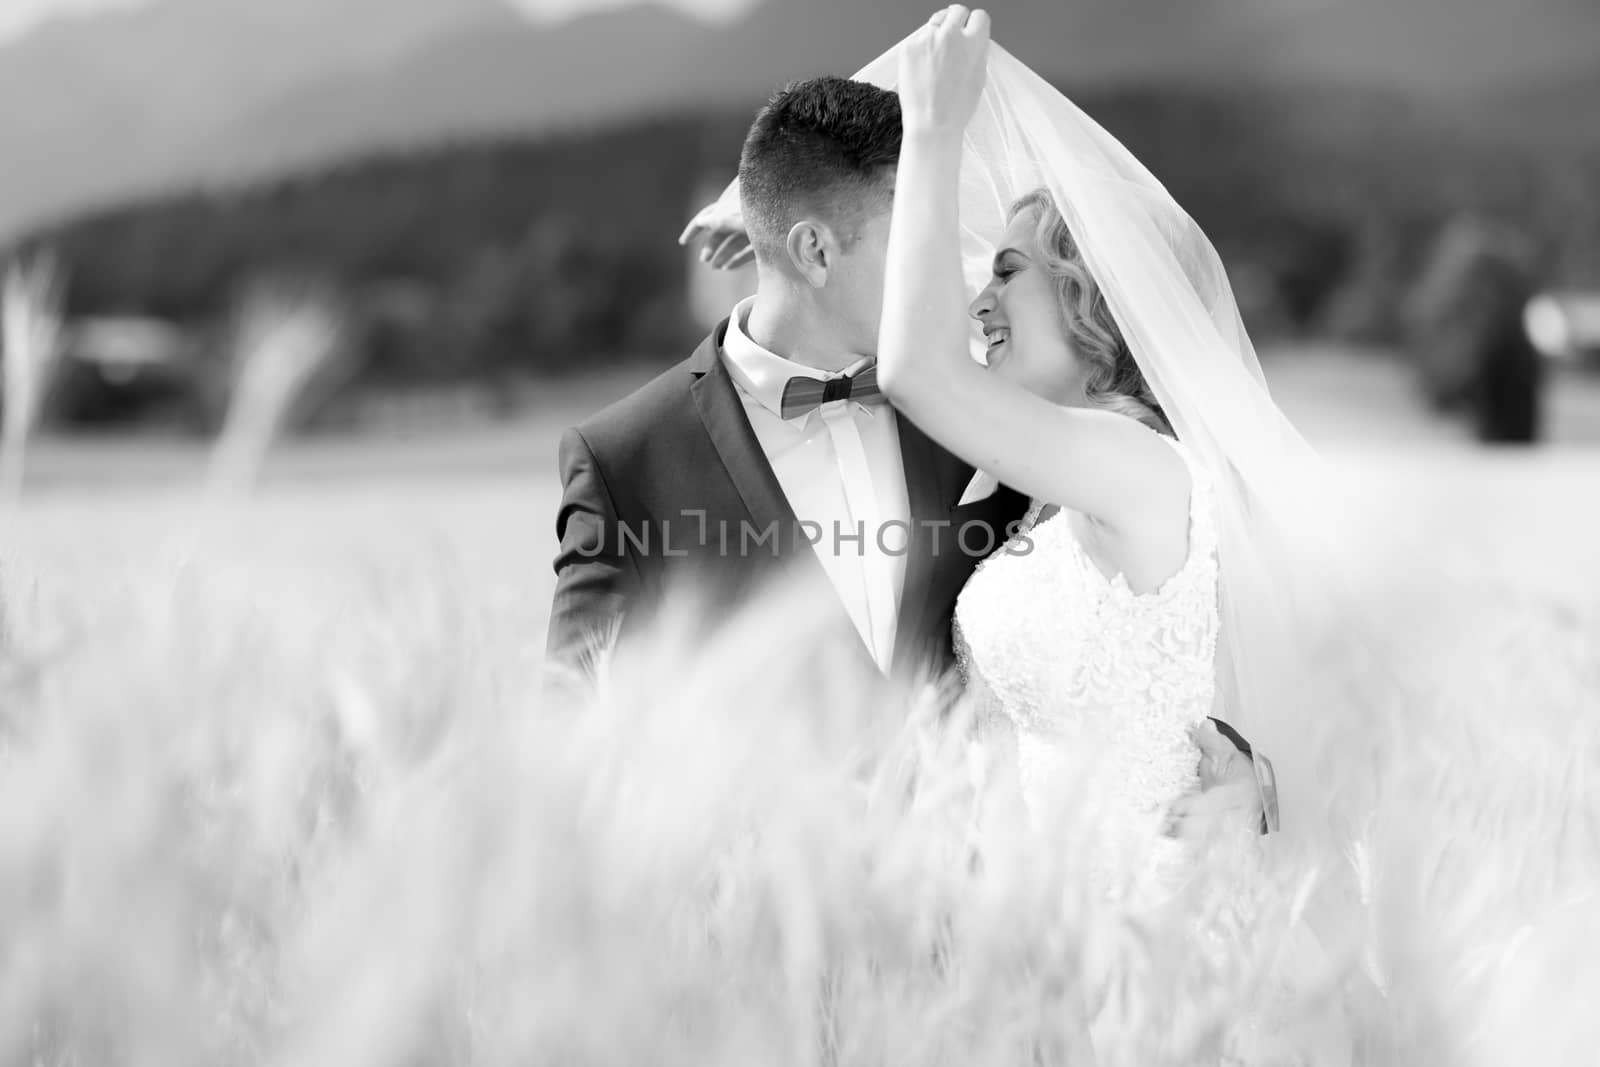 Groom hugs bride tenderly while wind blows her veil in wheat field somewhere in Slovenian countryside. Caucasian happy romantic young couple celebrating their marriage. Black and white photo.